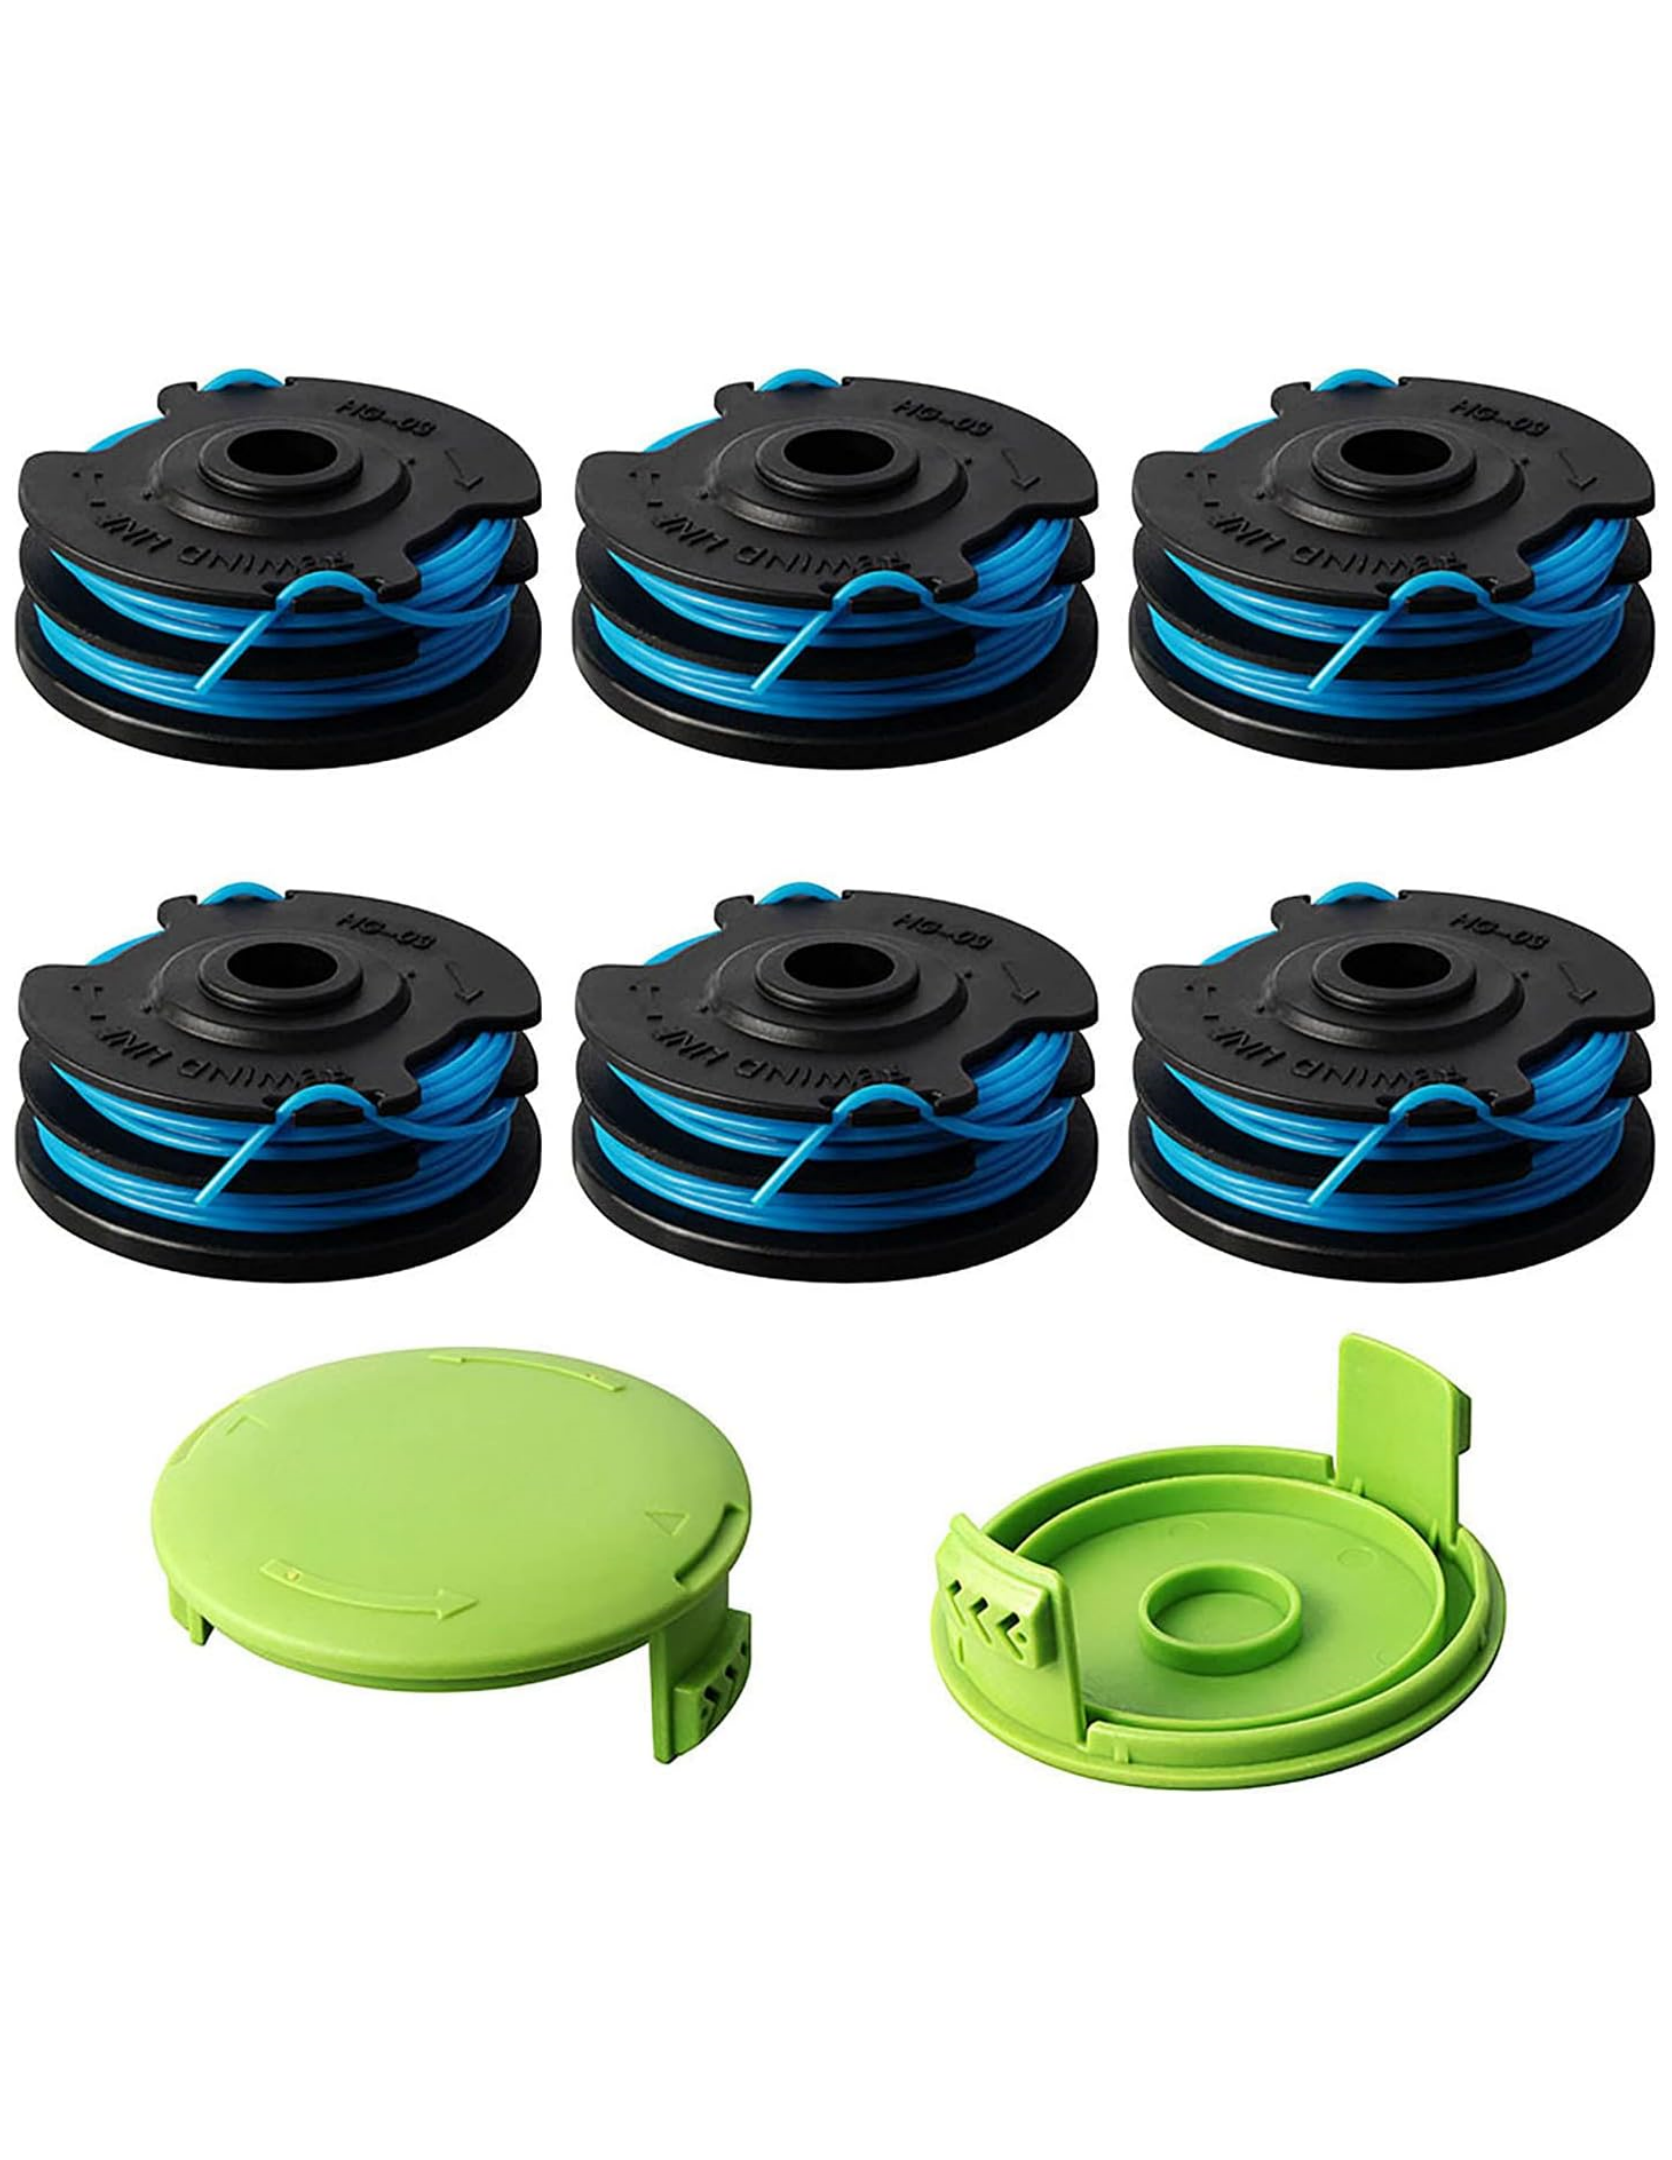 THTEN 29242 29082 Trimmer Spool Replacement 27ft 0.065 inch for Greenworks 24V 40V 21052 29272 and 21212 Dual line Electric String Trimmers with 3411546A6 Cap Covers Parts(6Pack+2 Cap)